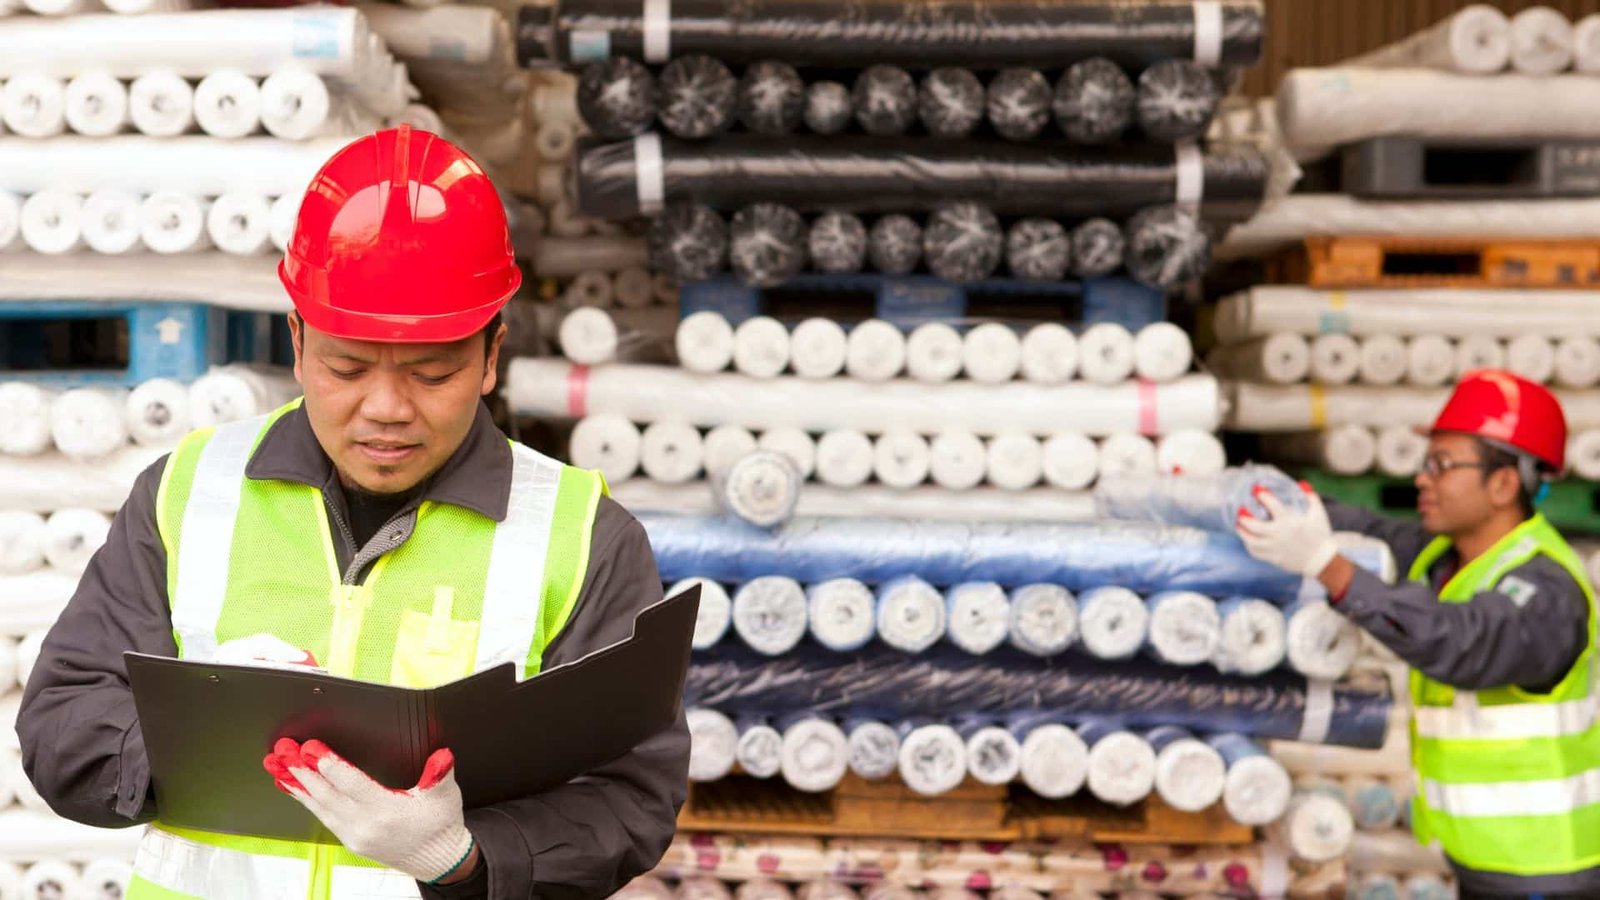 Engineering for the Textile Industry